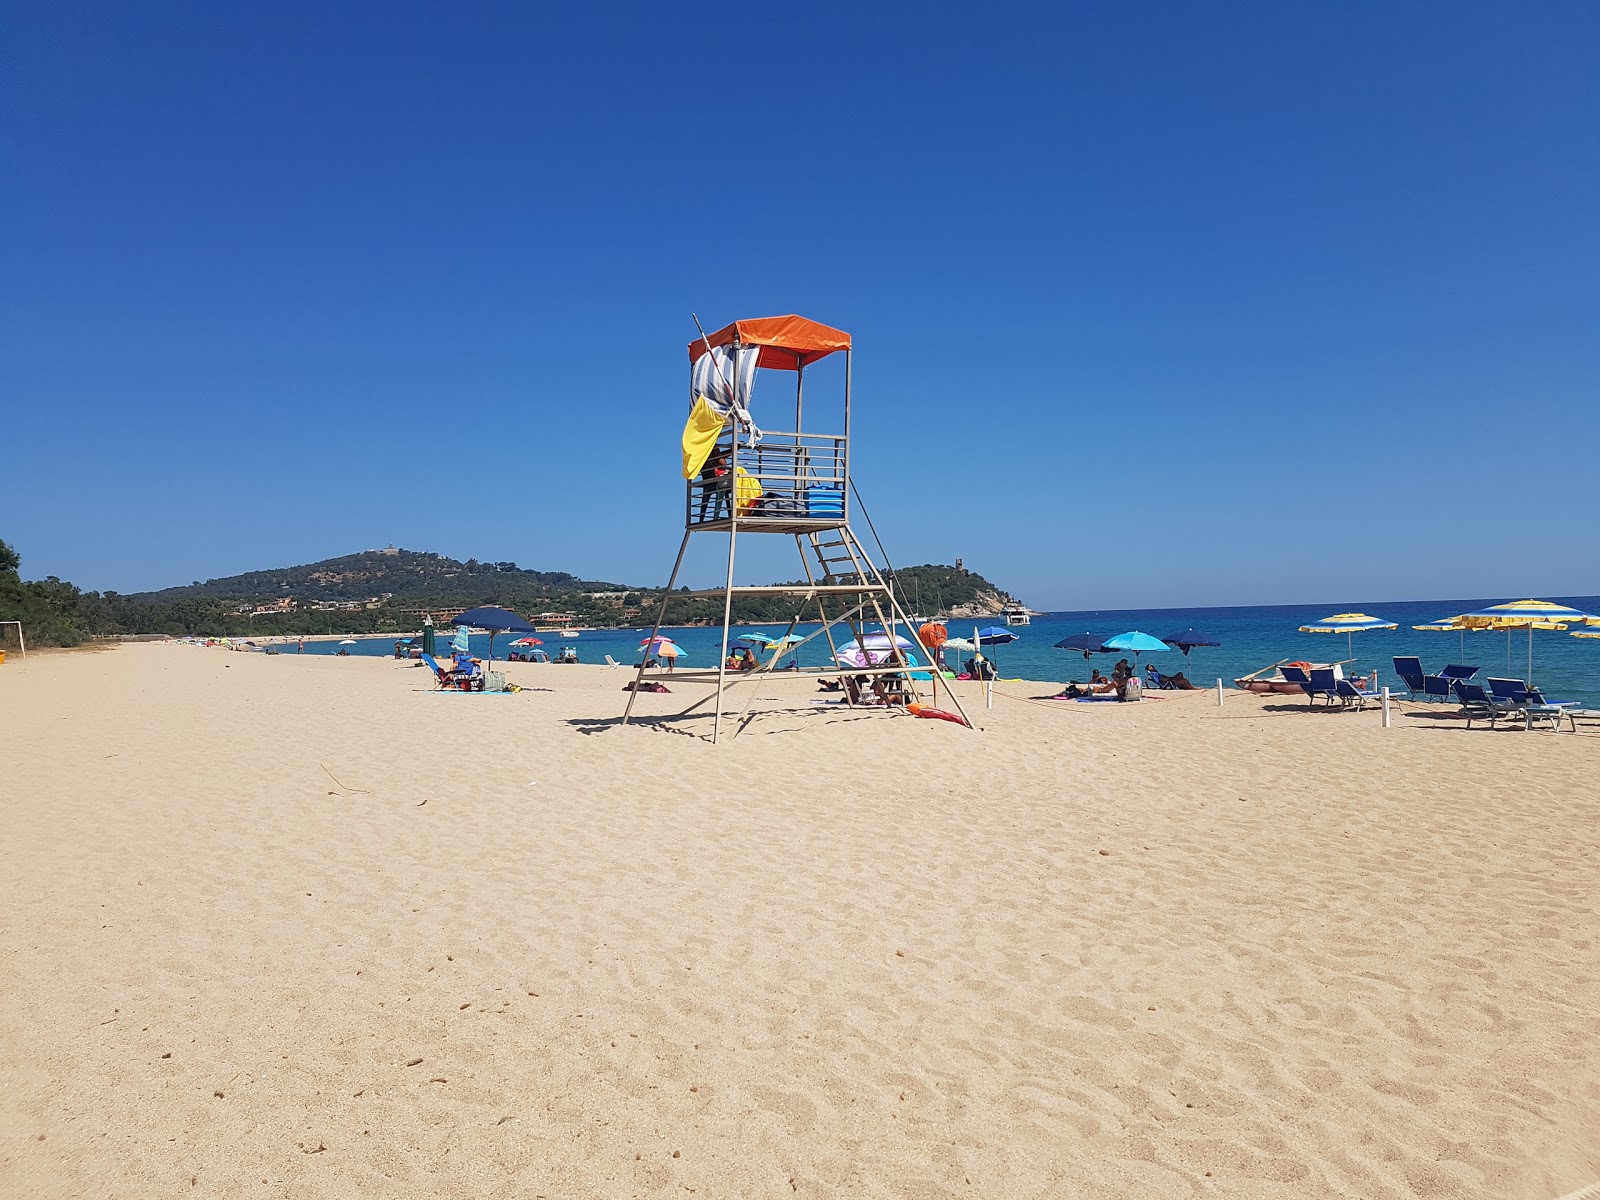 Photo of Spiaggia di Basaura - popular place among relax connoisseurs